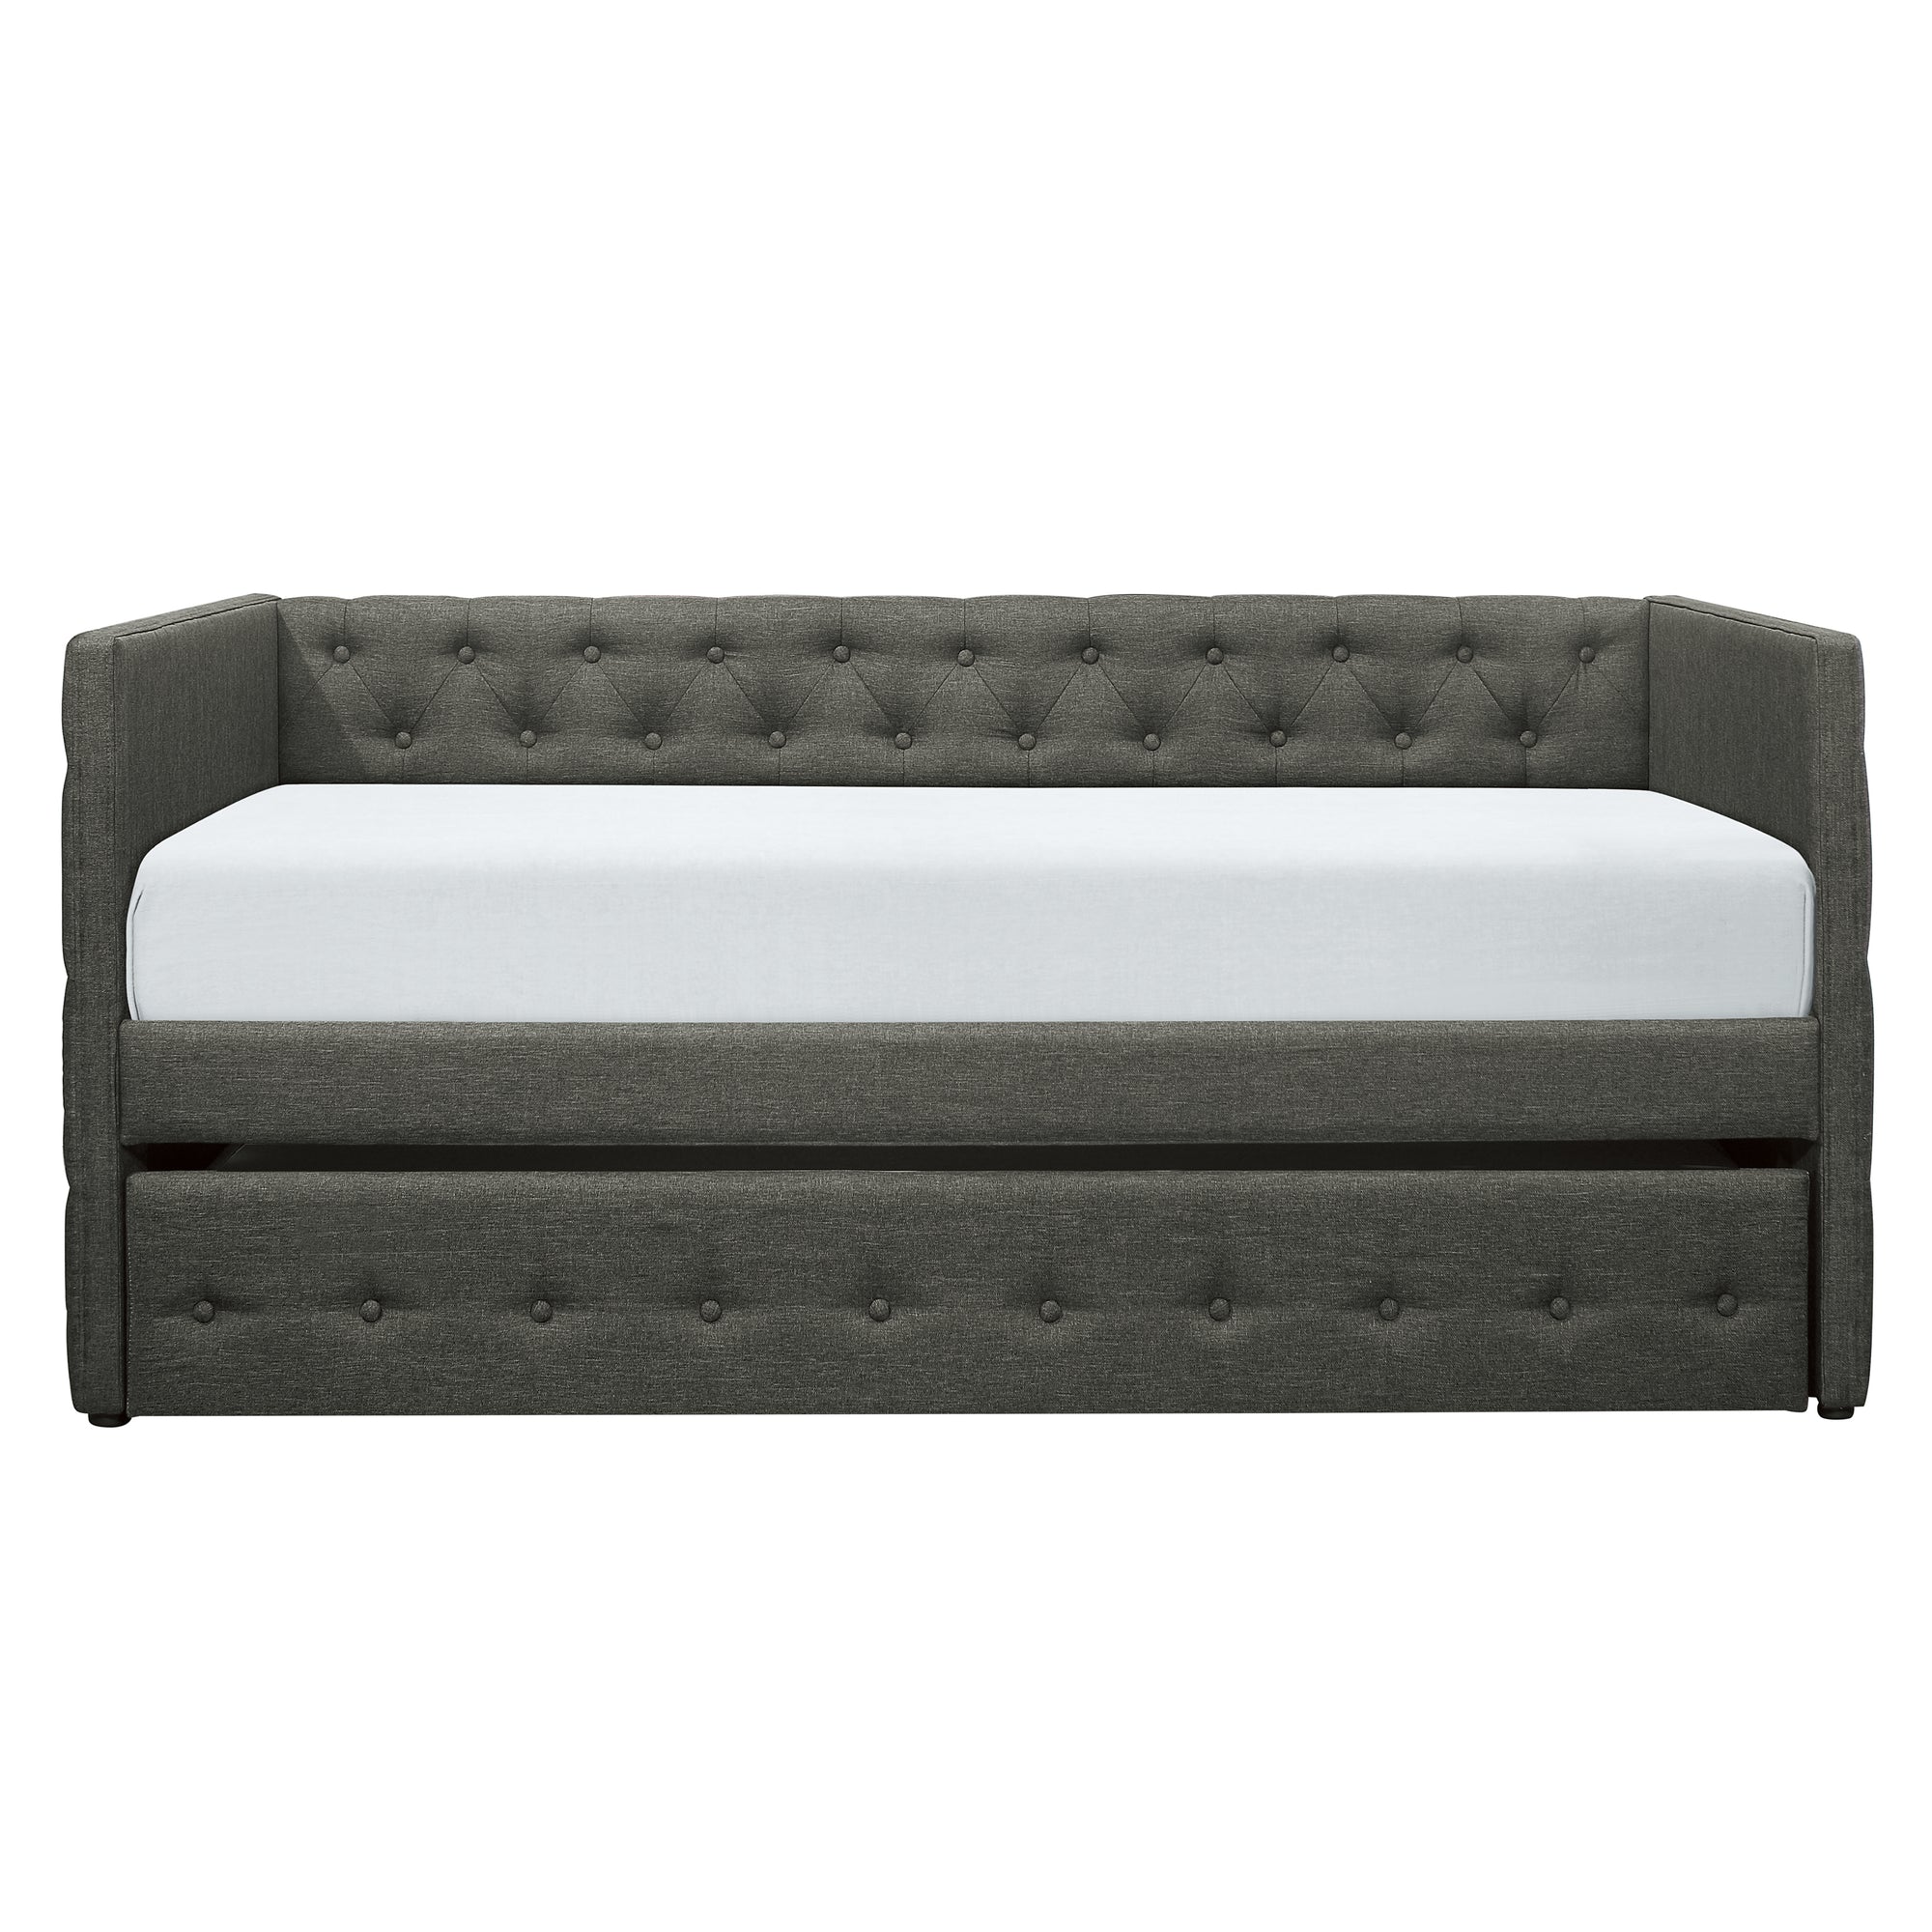 Deryn Daybed with Trundle